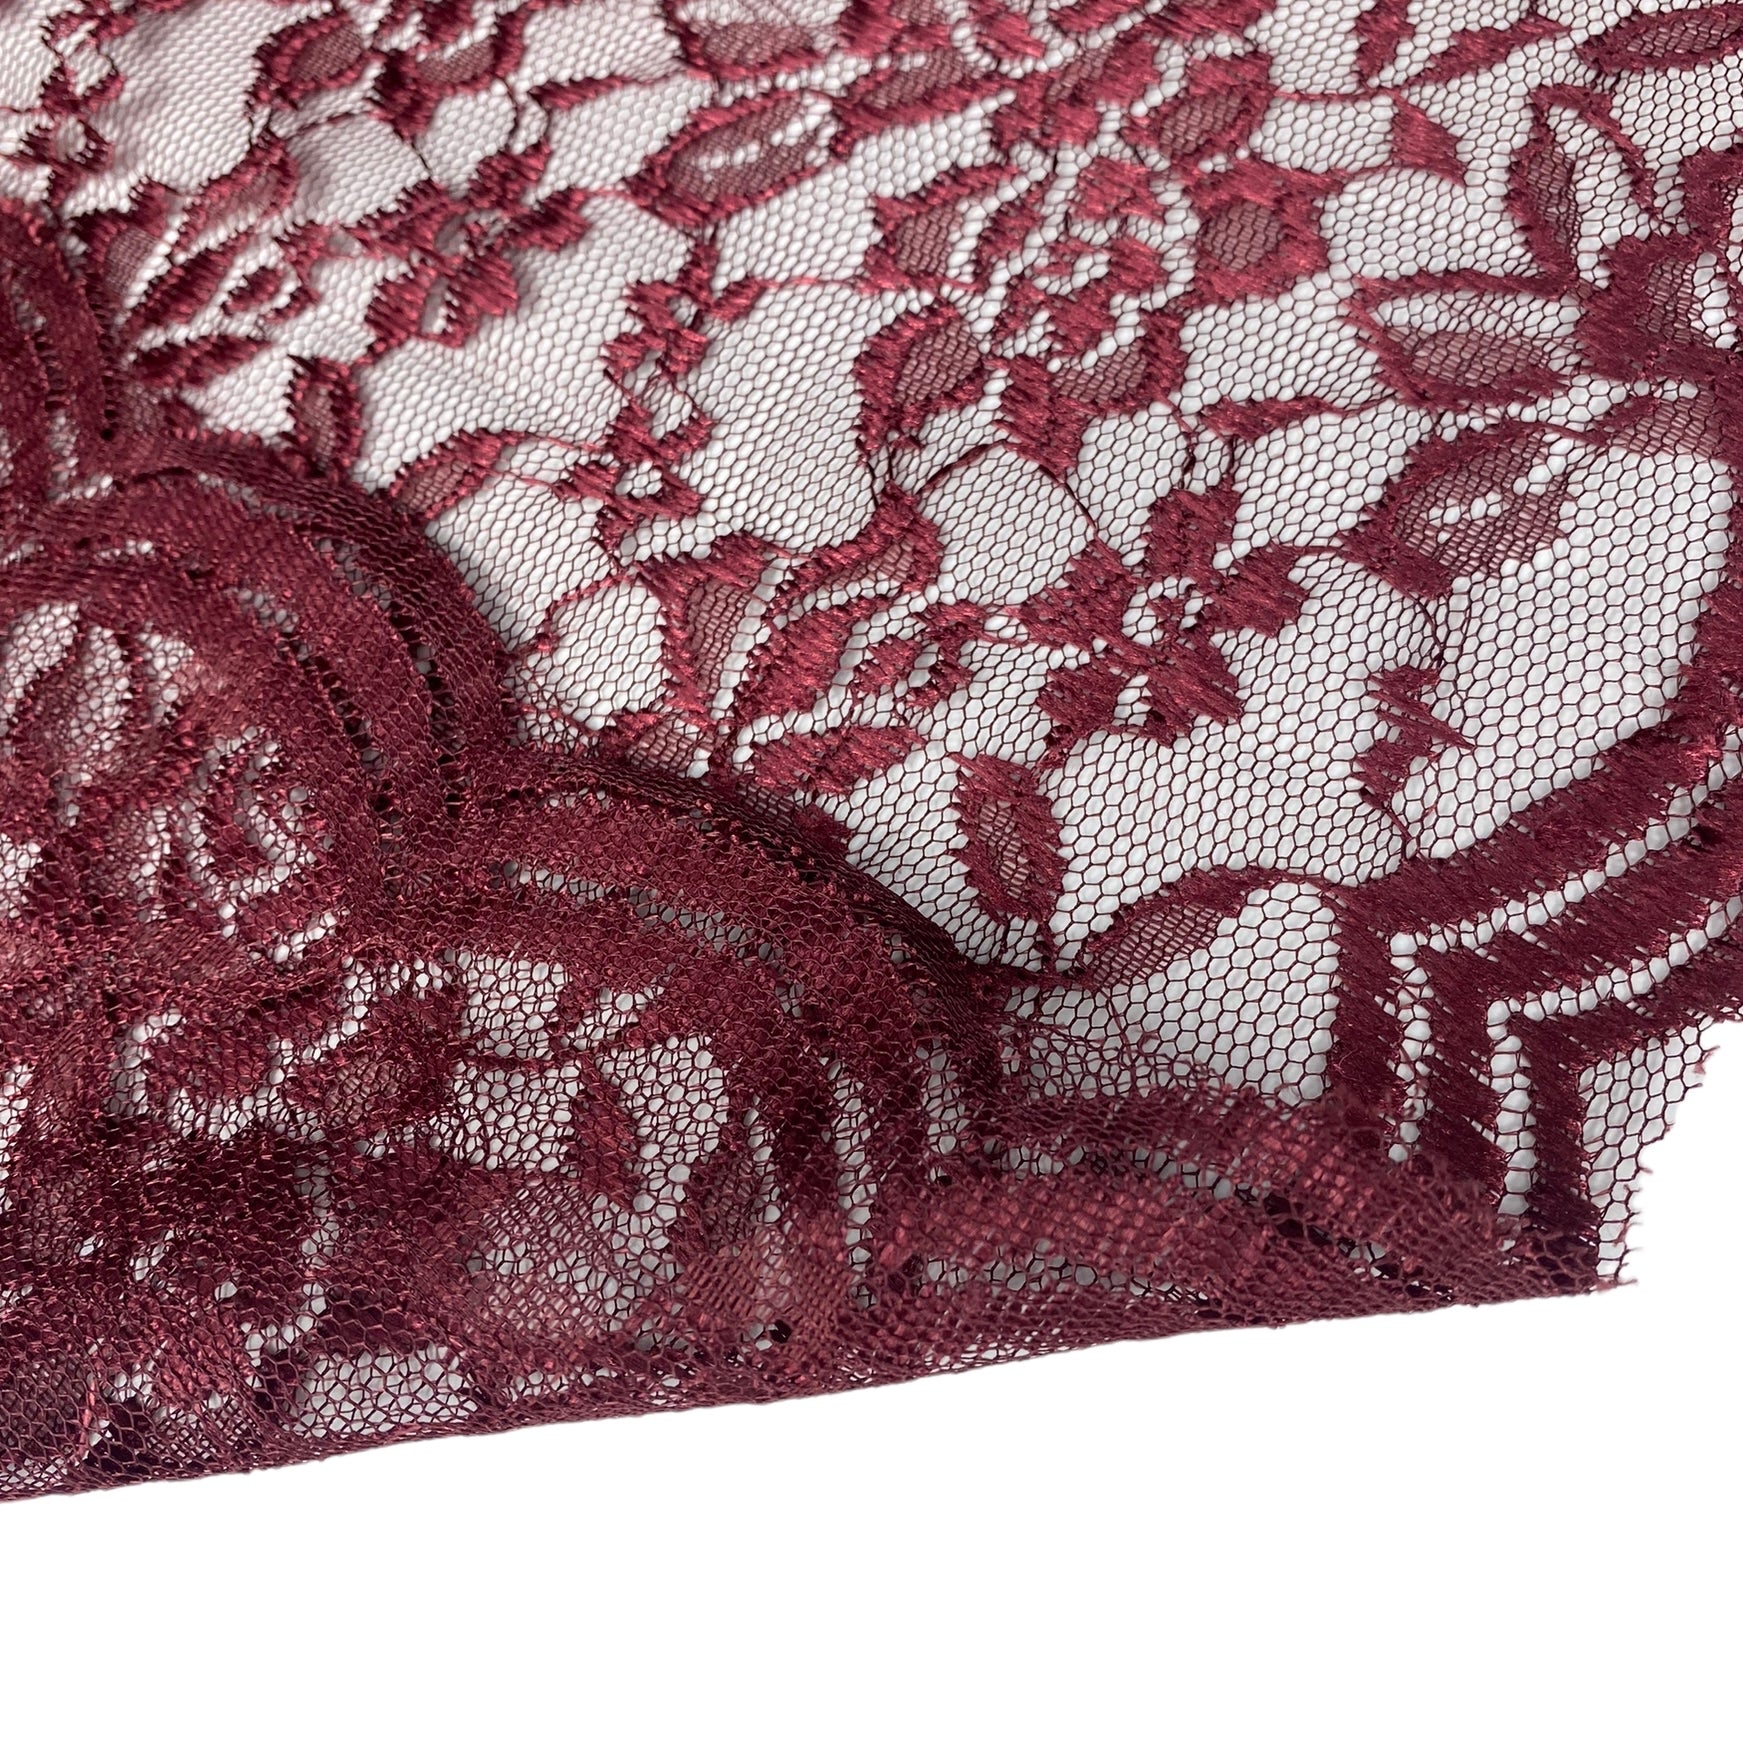 Floral Embroidered Lace with Finished Edges - Burgundy